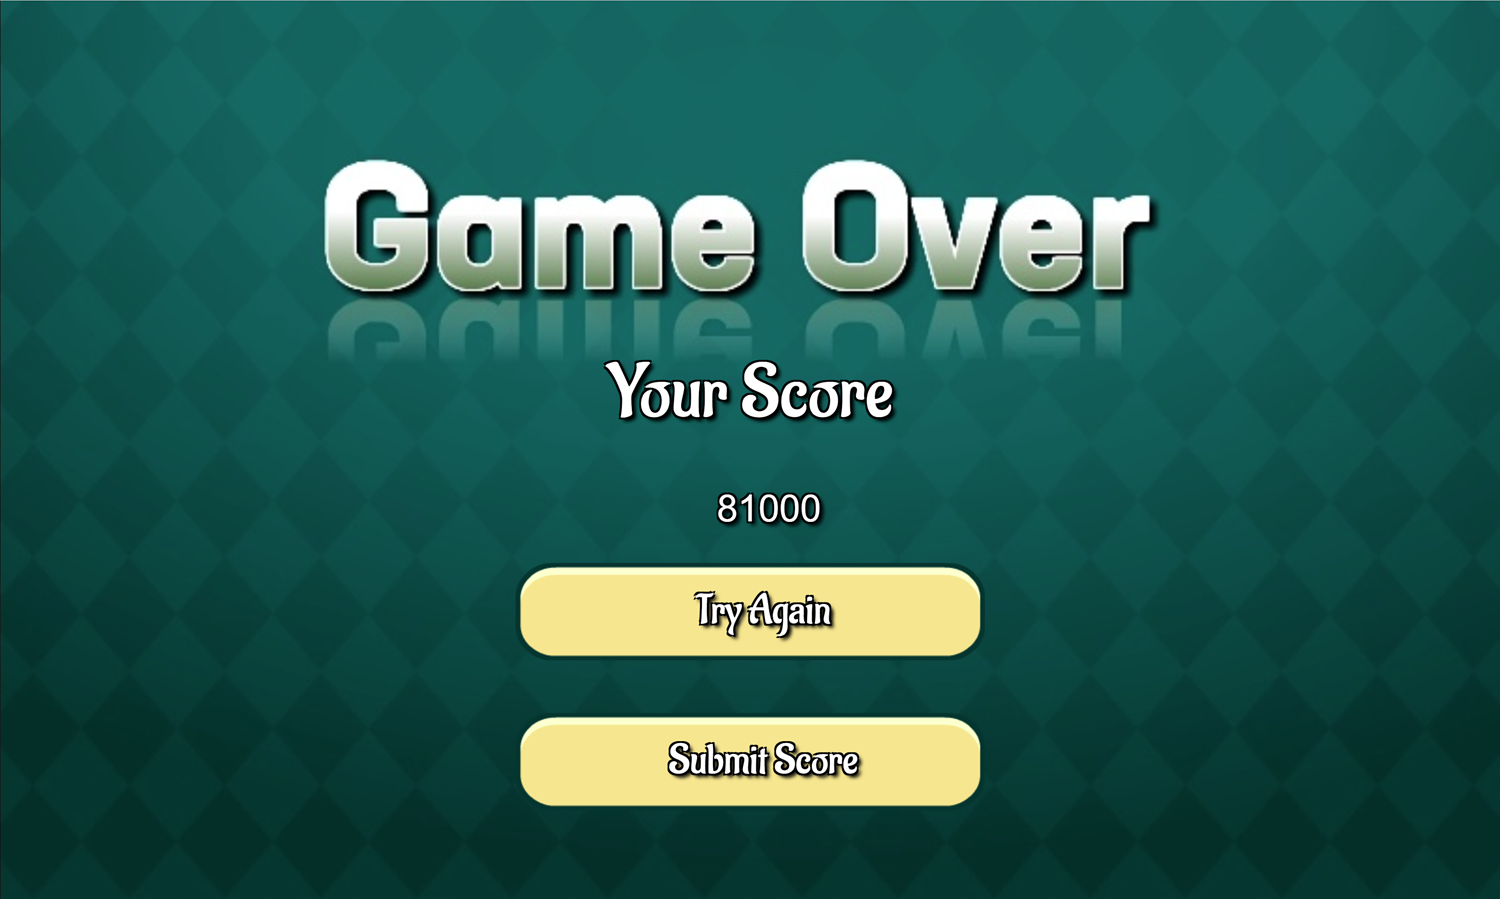 Challenge Freecell Game Over Screen Screenshot.